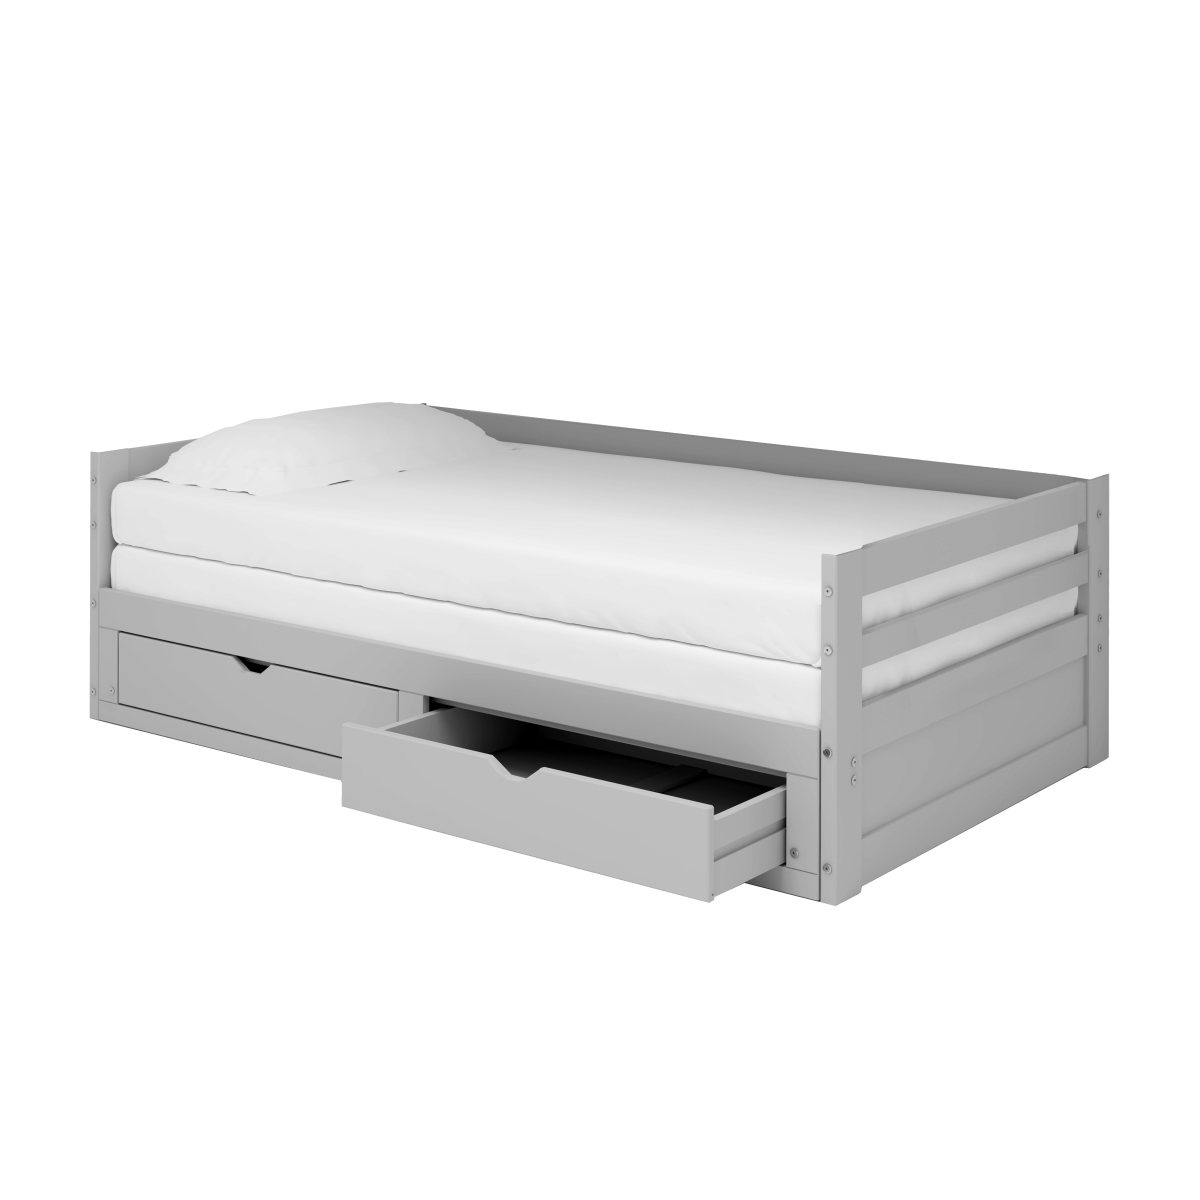 Picture of Alaterre AJJP1080 Jasper Twin to King Size Extending Day Bed with Storage Drawers, Dove Gray